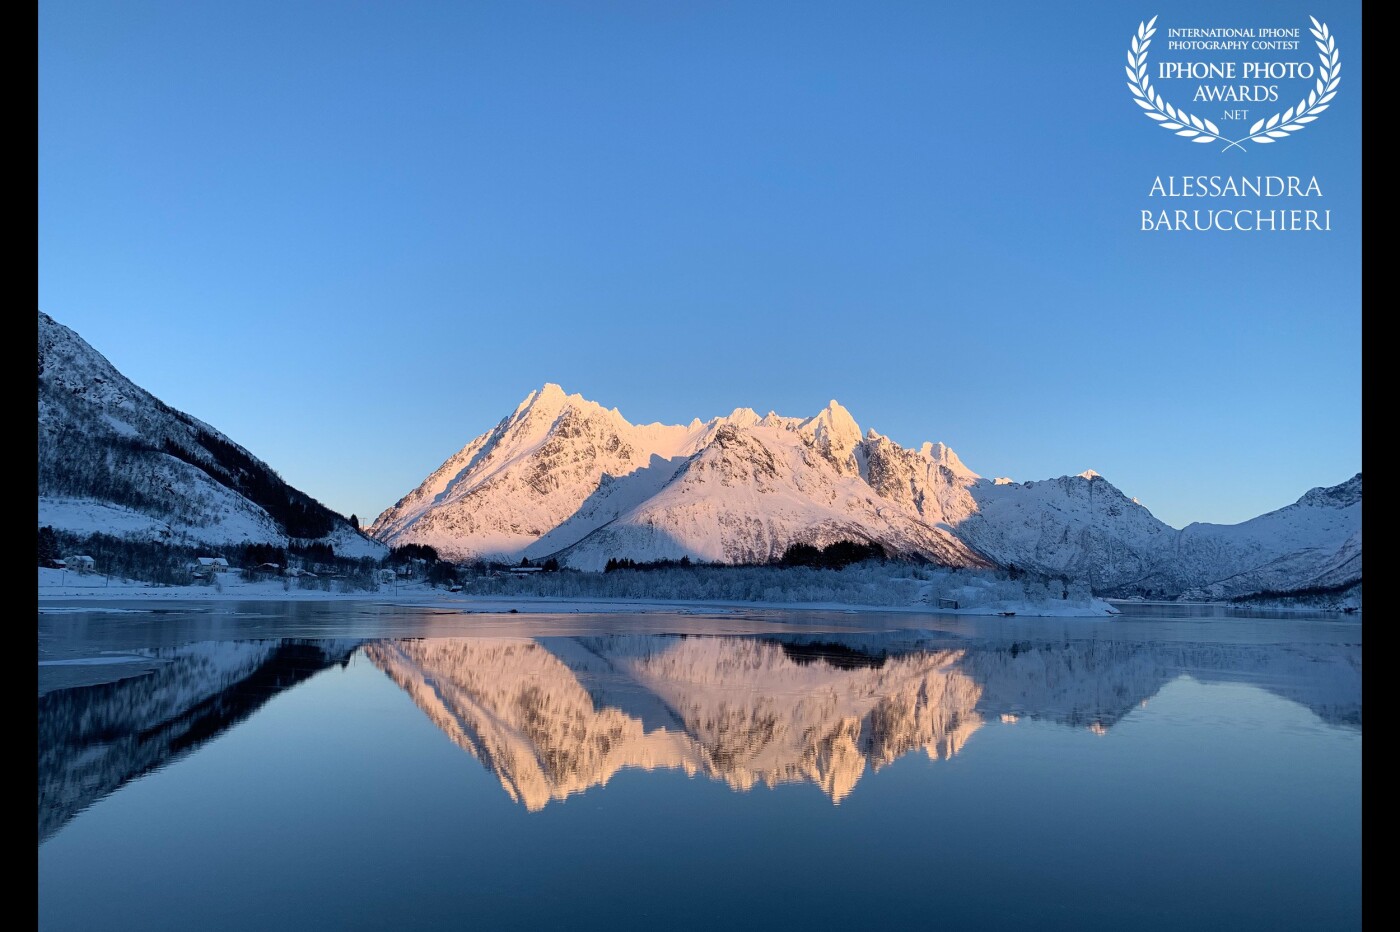 In Lofoten, Norway, fjords, and canals follow one another at the foot of the mountains with beautiful reflections<br />
<br />
Alle Lofoten, Norvegia, i fiordi e i canali si susseguono ai piedi delle montagne con riflessi bellissimi